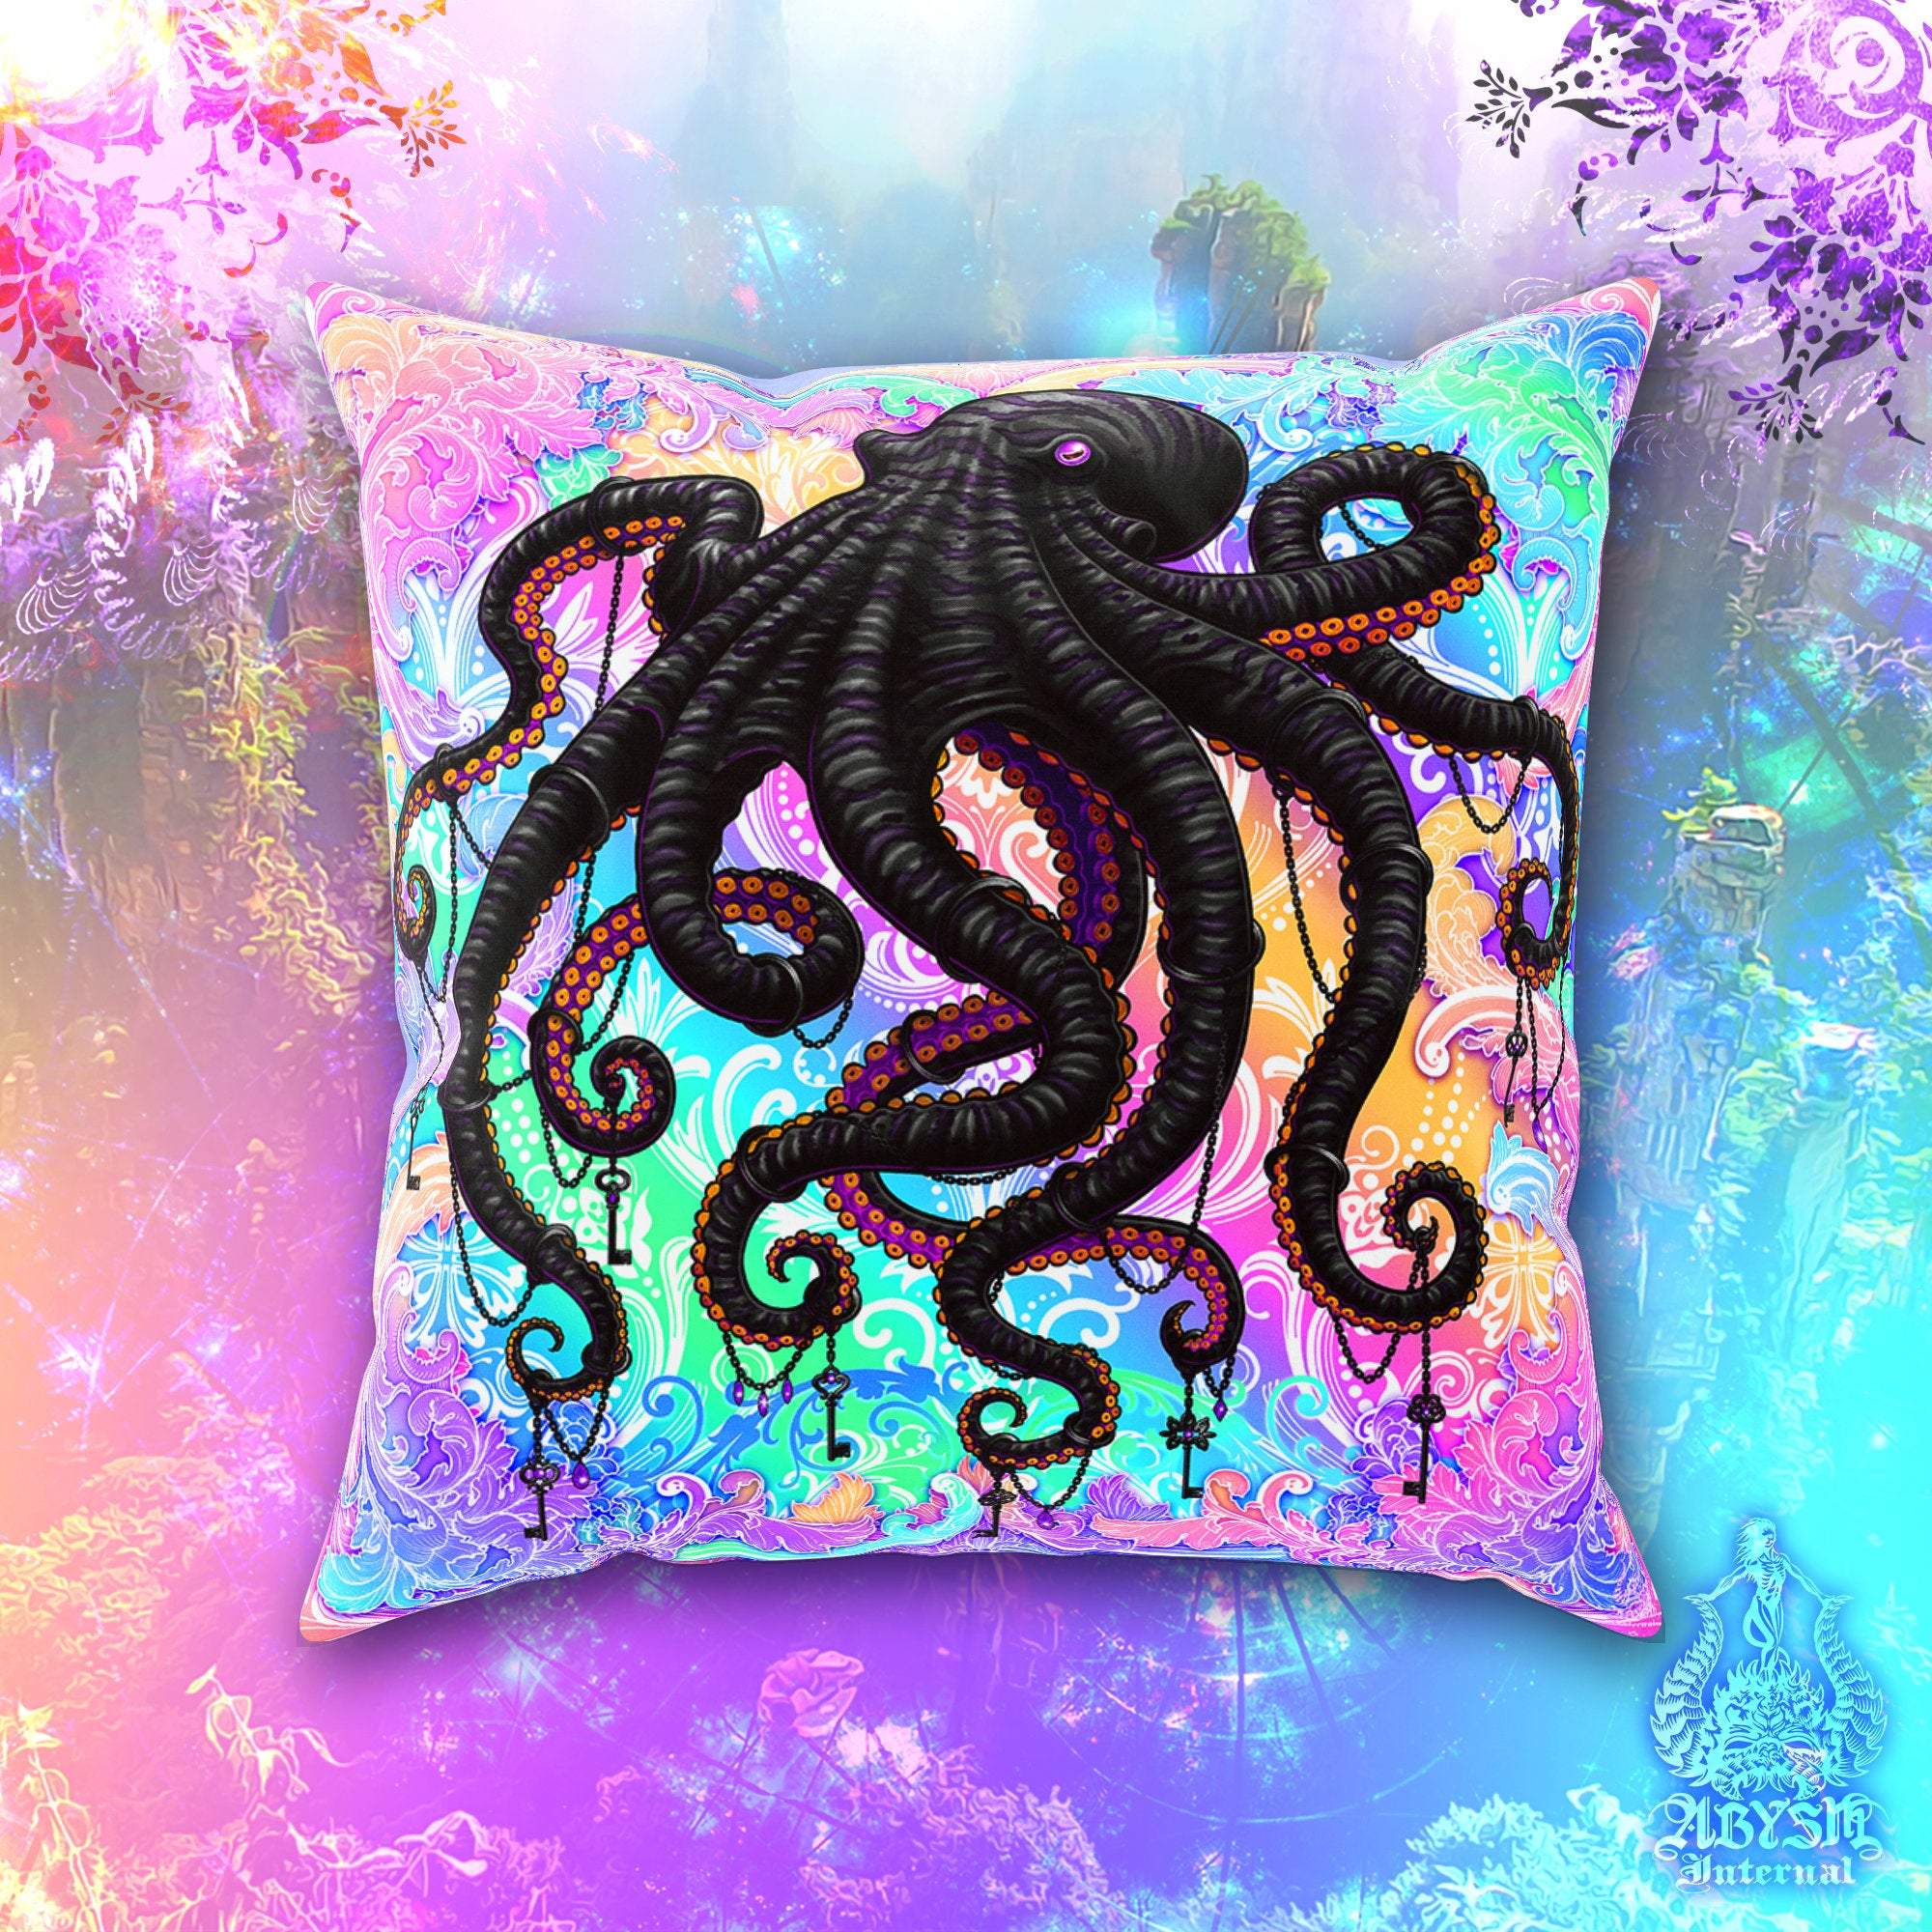 Psychedelic Throw Pillow, Decorative Accent Cushion, Psychedelic Room Decor, Eclectic, Funky Home - Pastel Punk Black Octopus - Abysm Internal